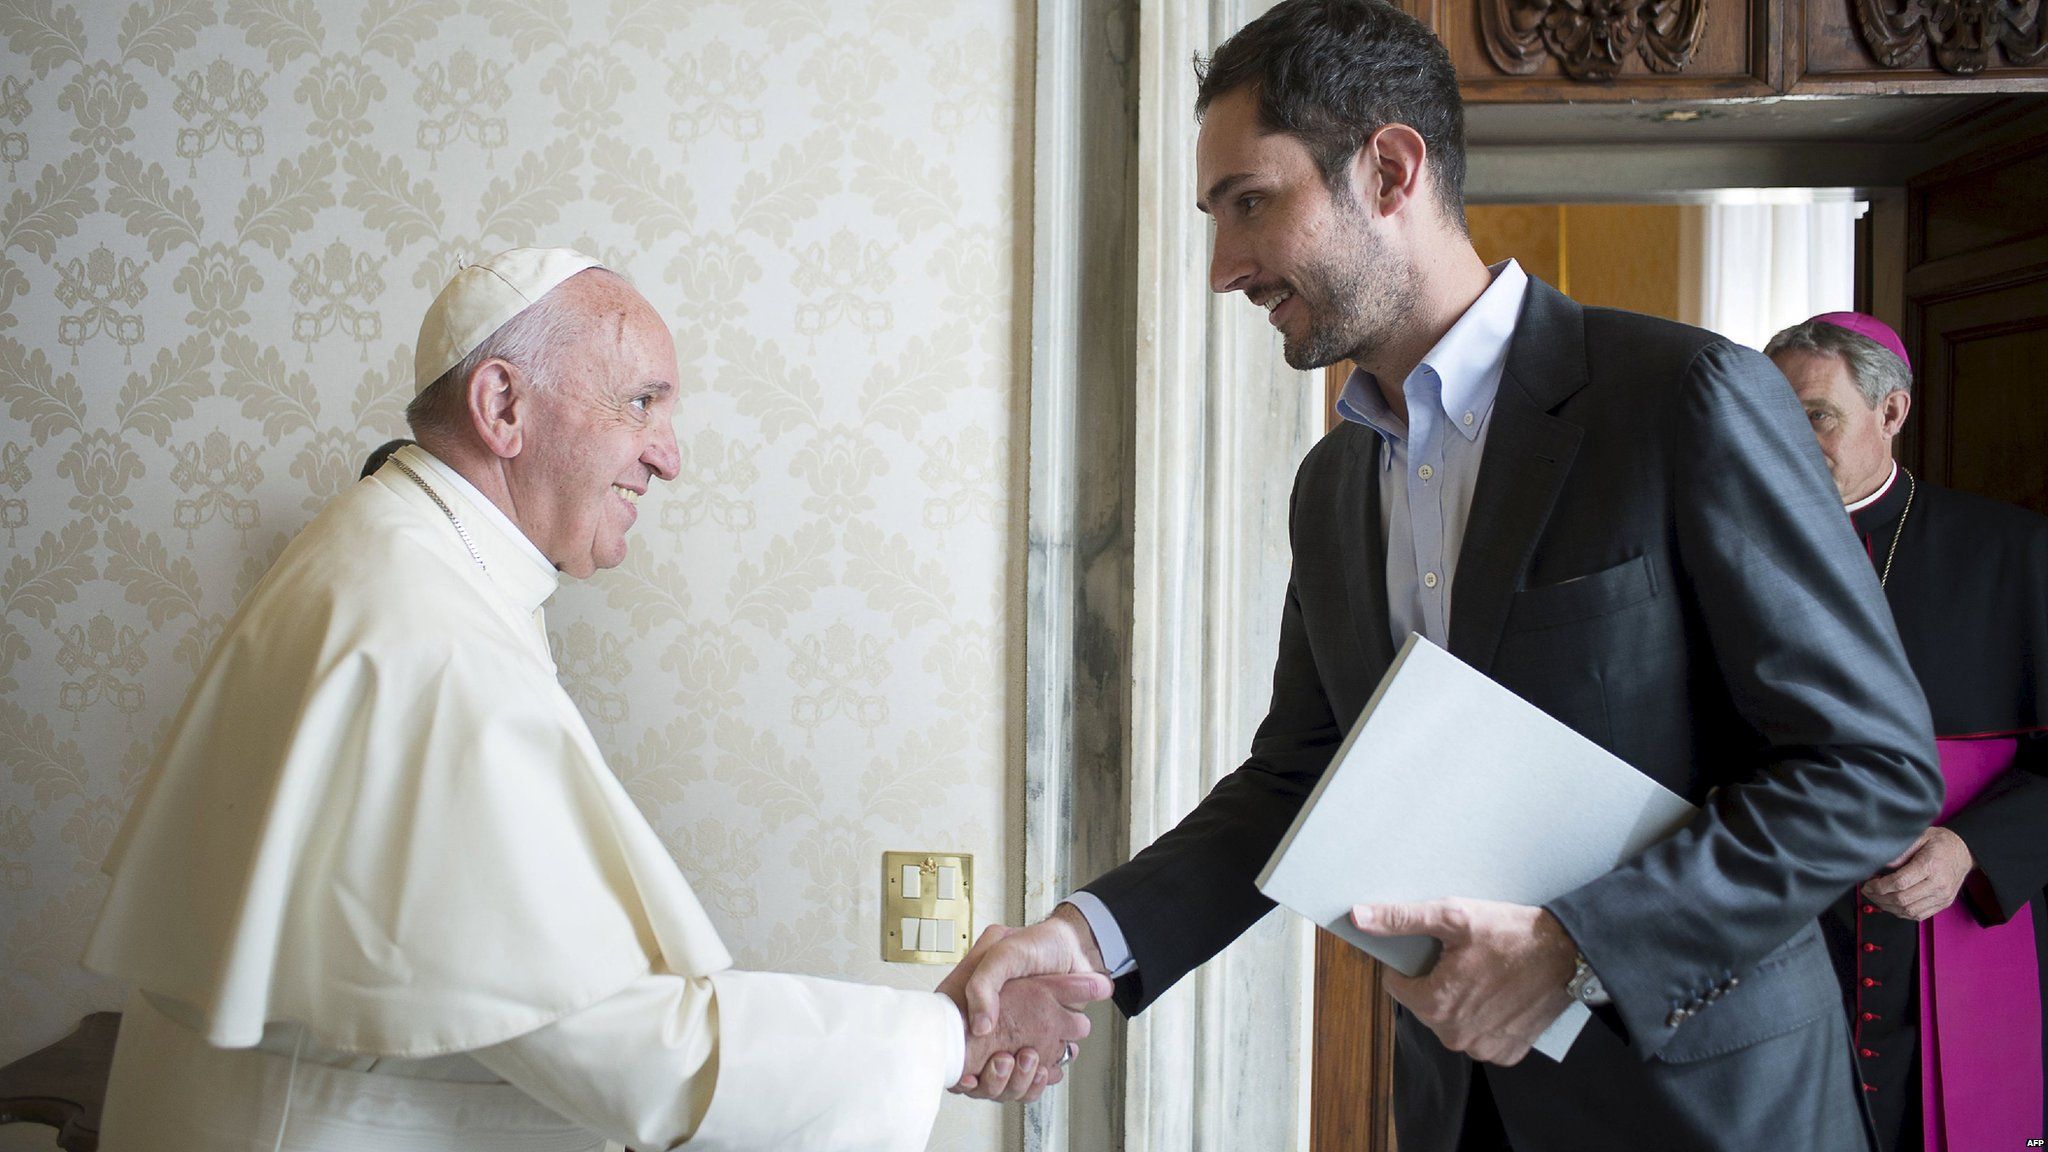 Instagram chief executive and co-founder Kevin Systrom met up with Pope Francis earlier this month.